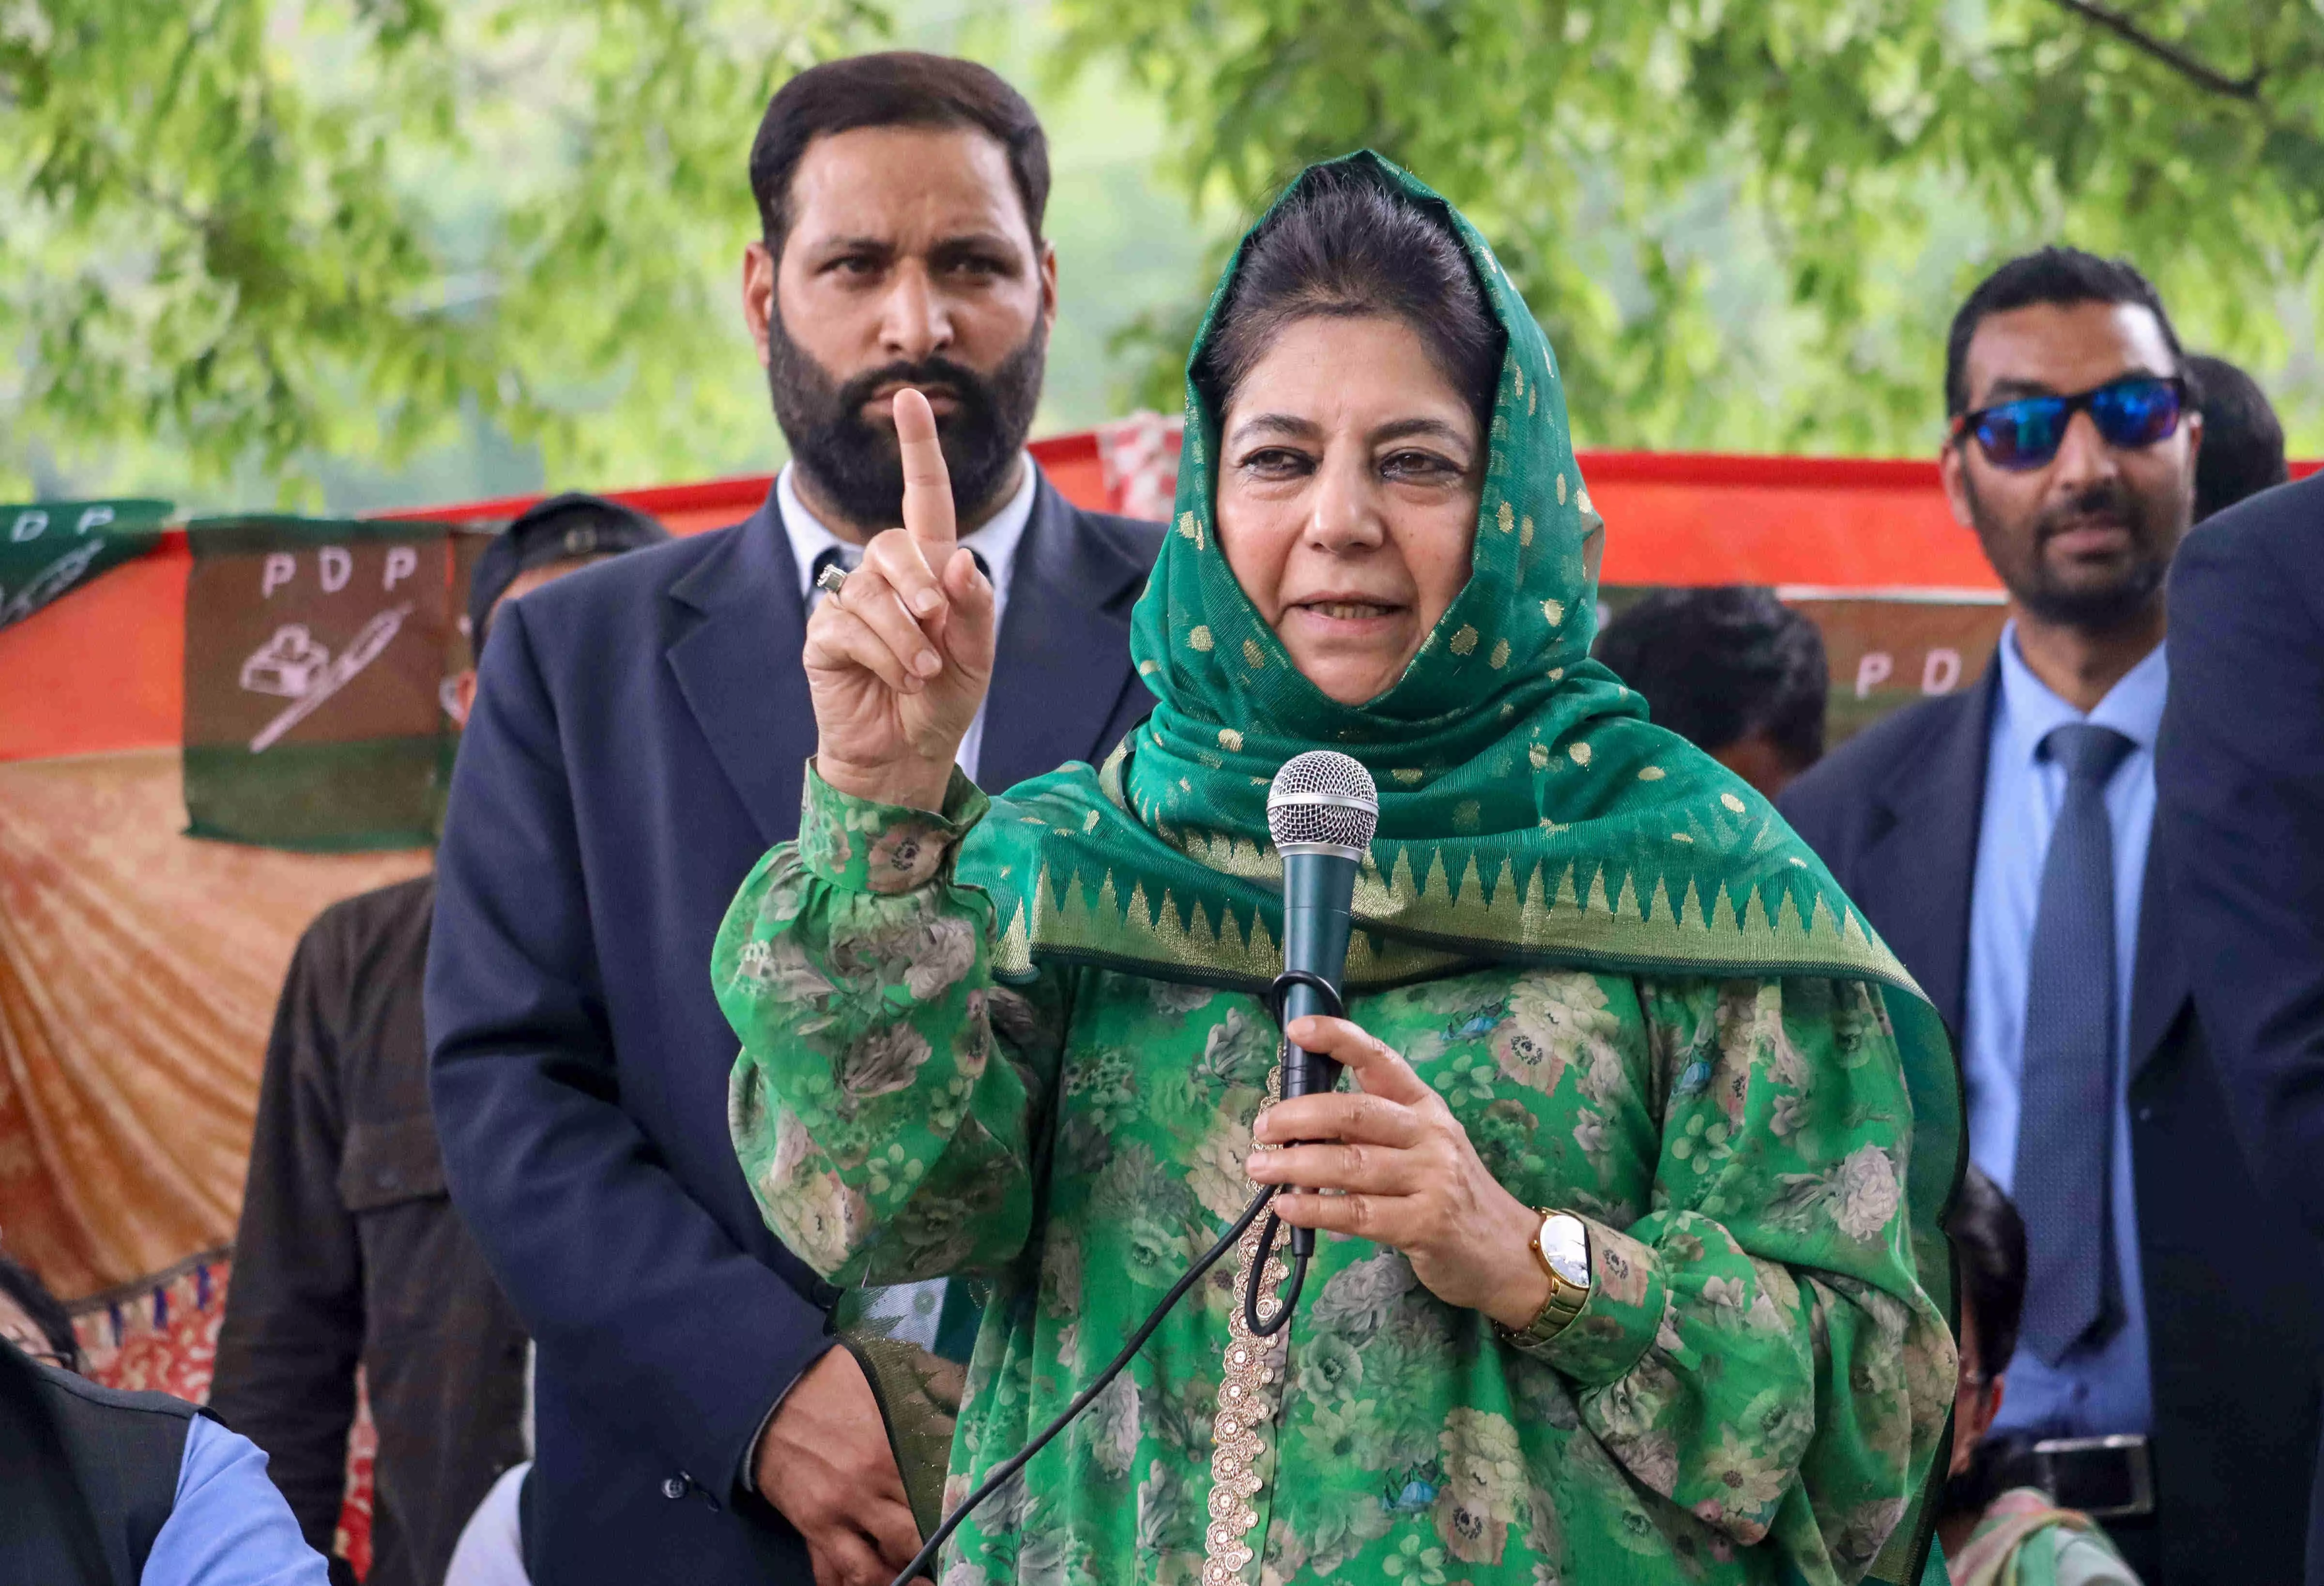 Express unhappiness over Art 370 abrogation through votes: Mehbooba to J&K voters